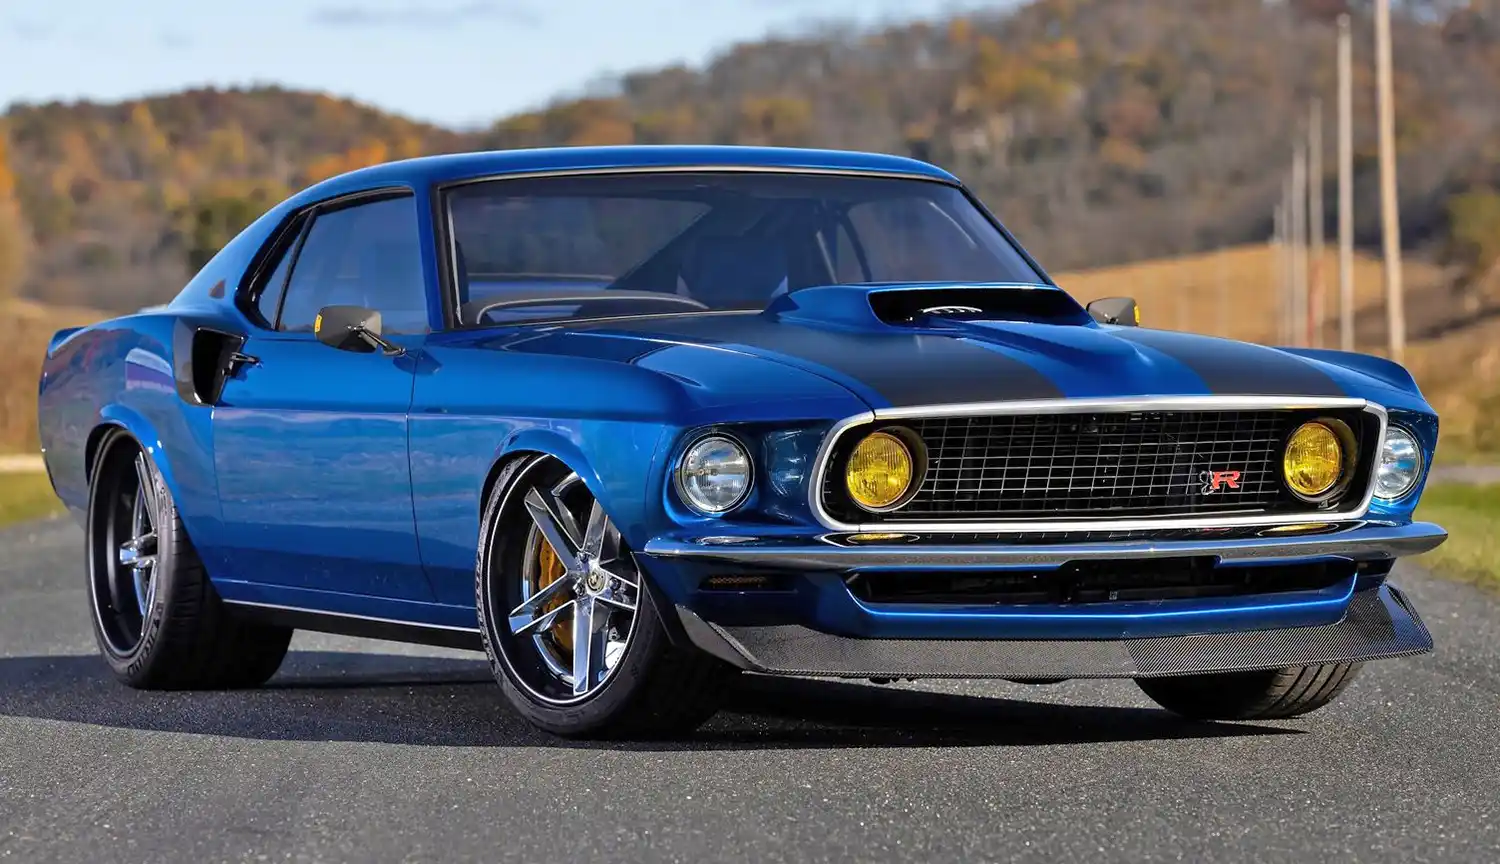 Ford Mustang Mach 1 PATRIARC by Ringbrothers | EN.WHEELZ.ME